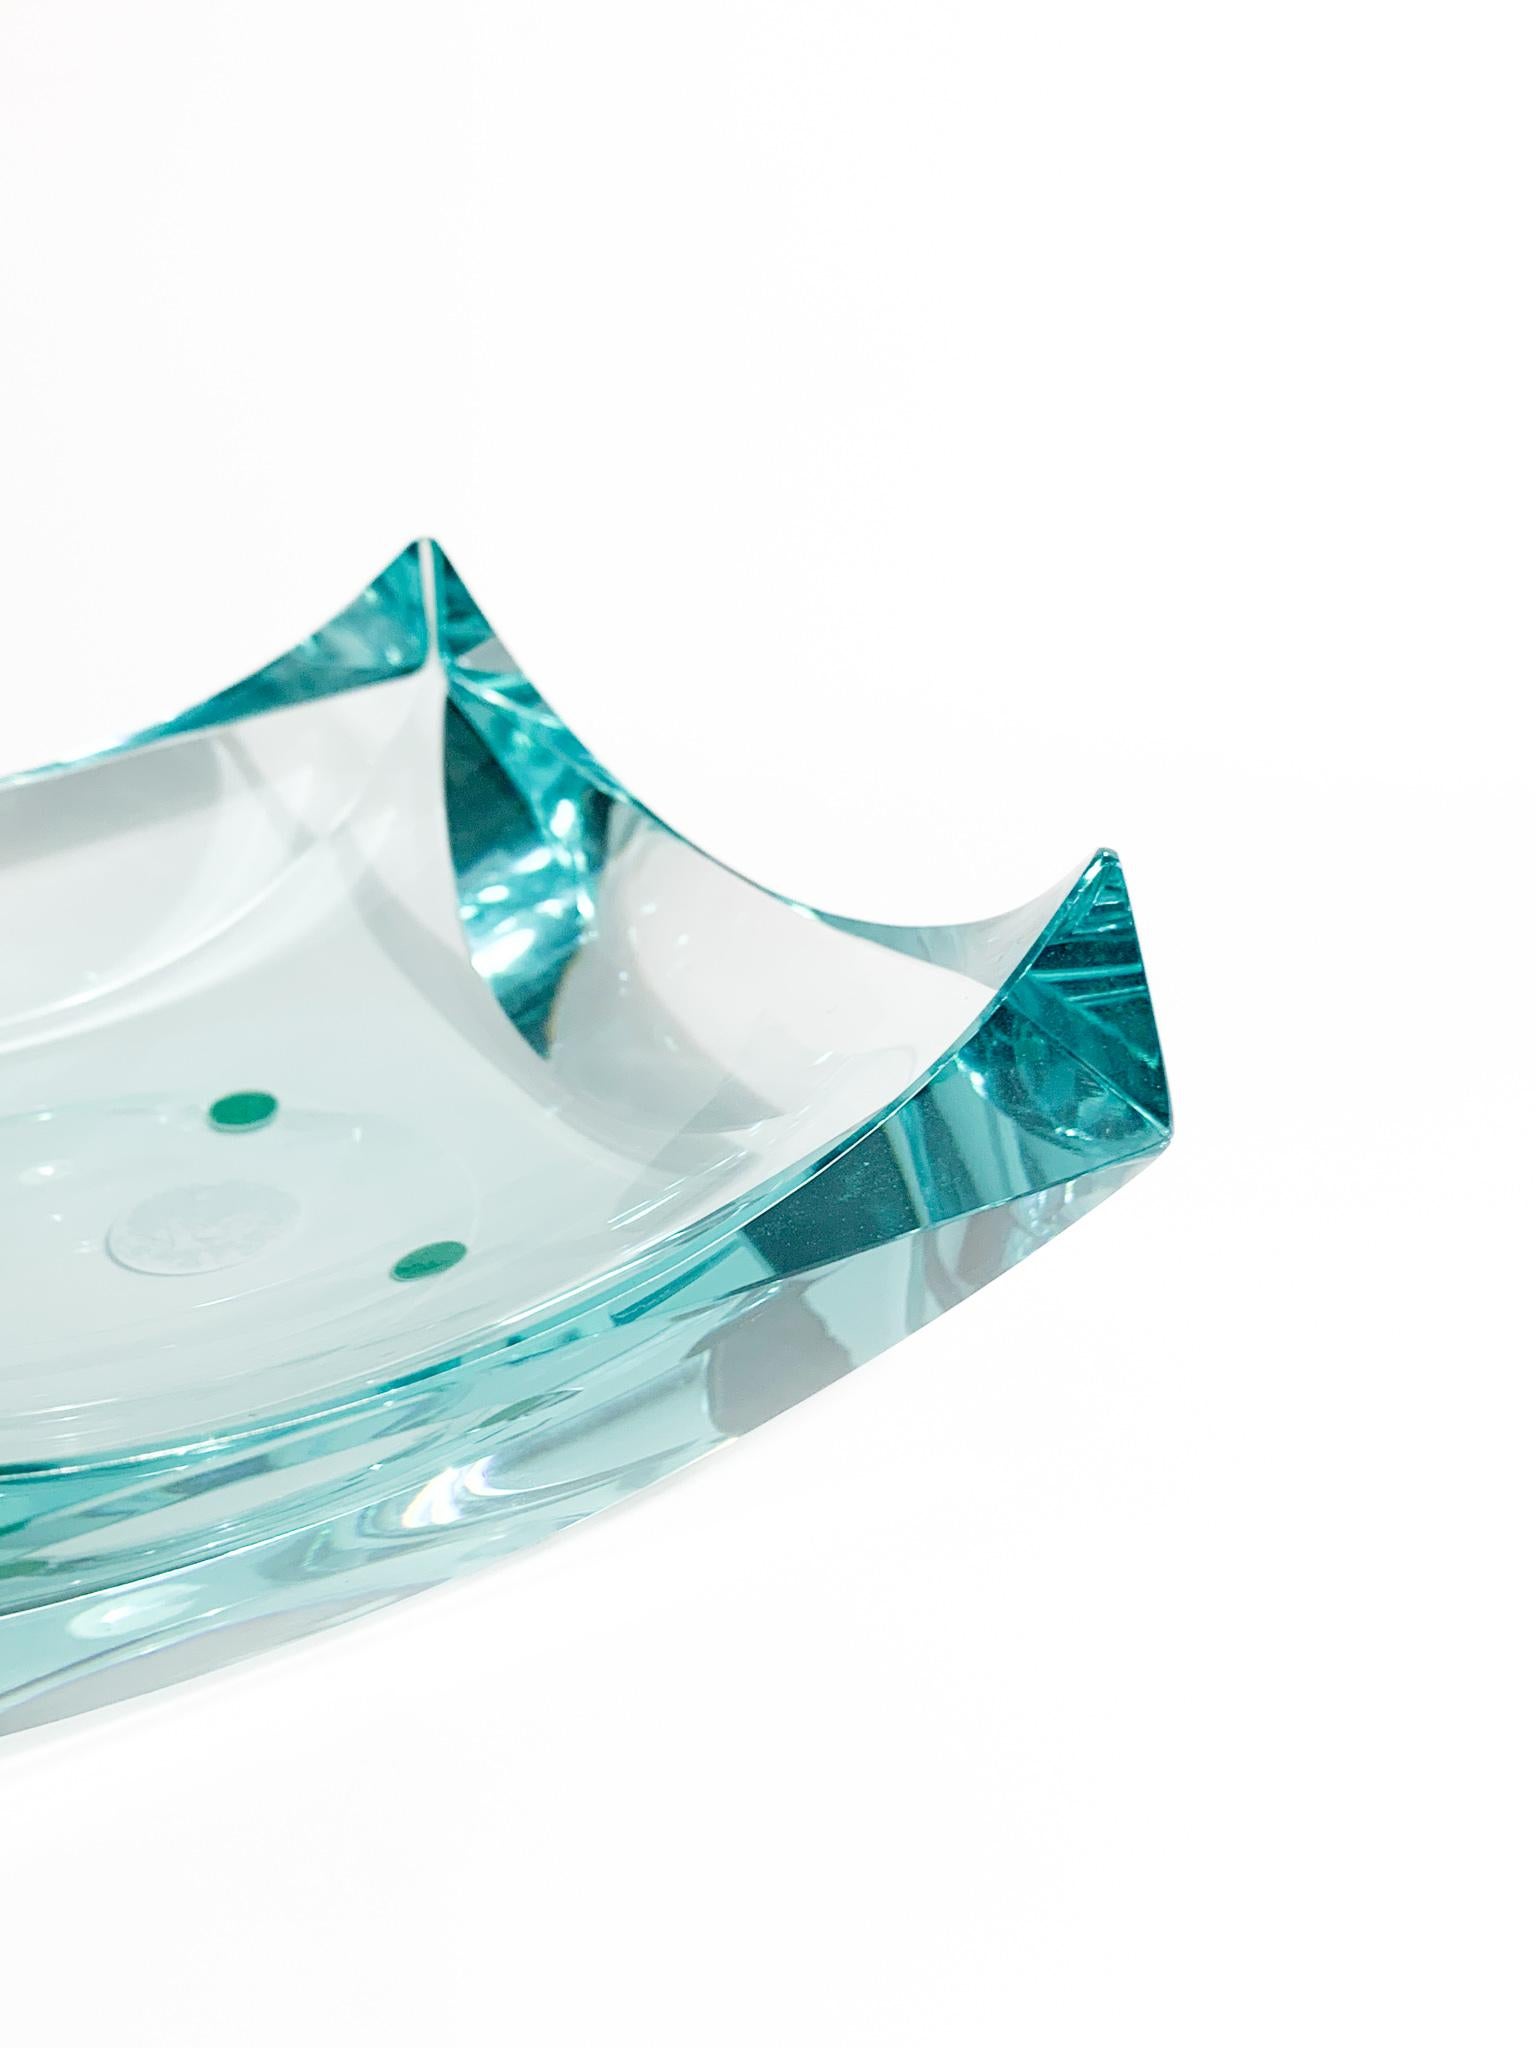 Italian Light Blue Glass Ashtray Attributed to Fontana Arte from the 1970s For Sale